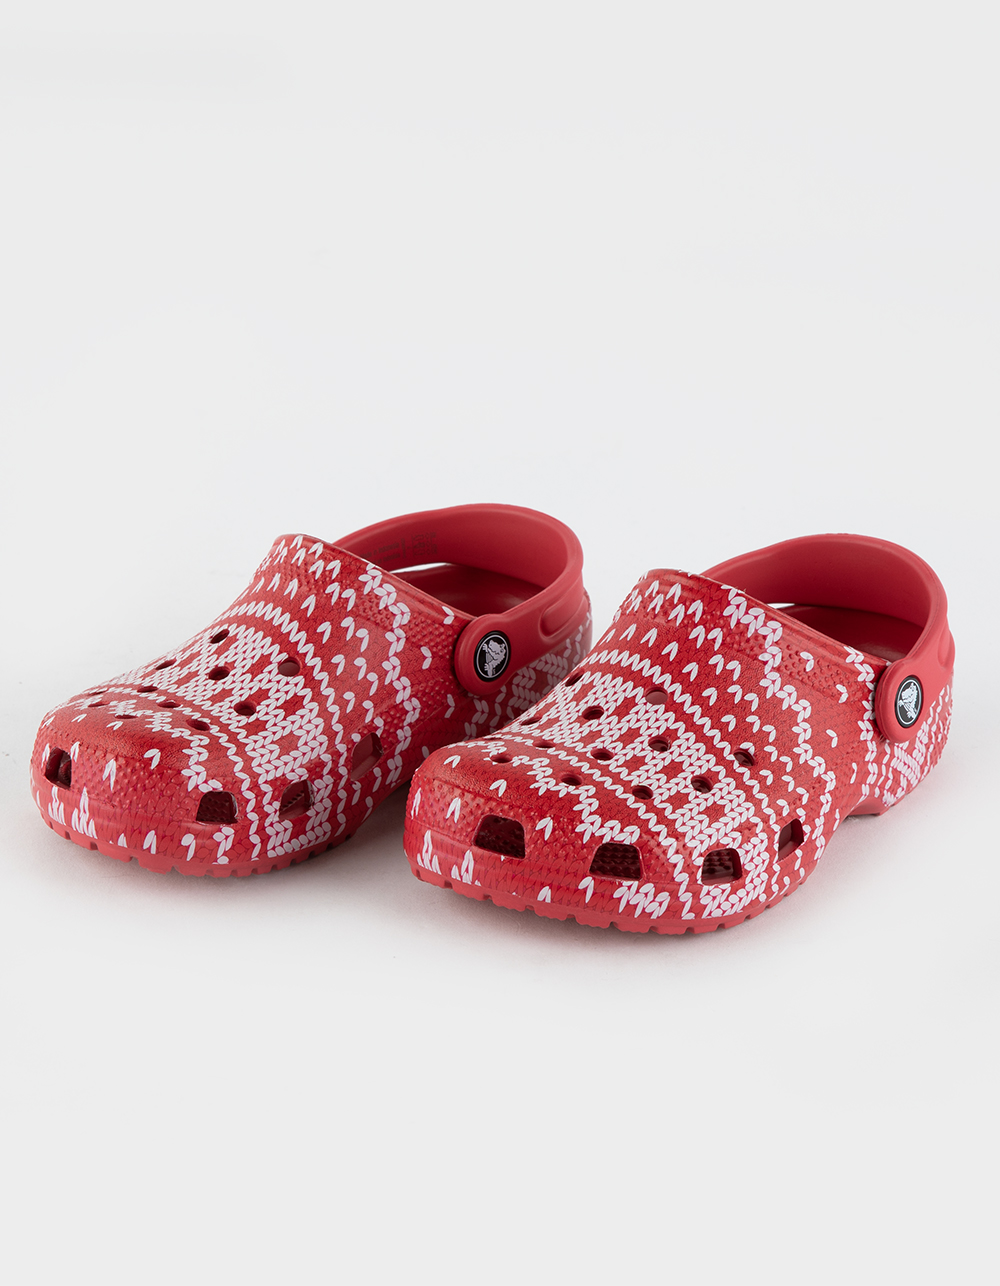 CROCS Classic | Tillys - RED COMBO Girls Sweater Clogs Holiday